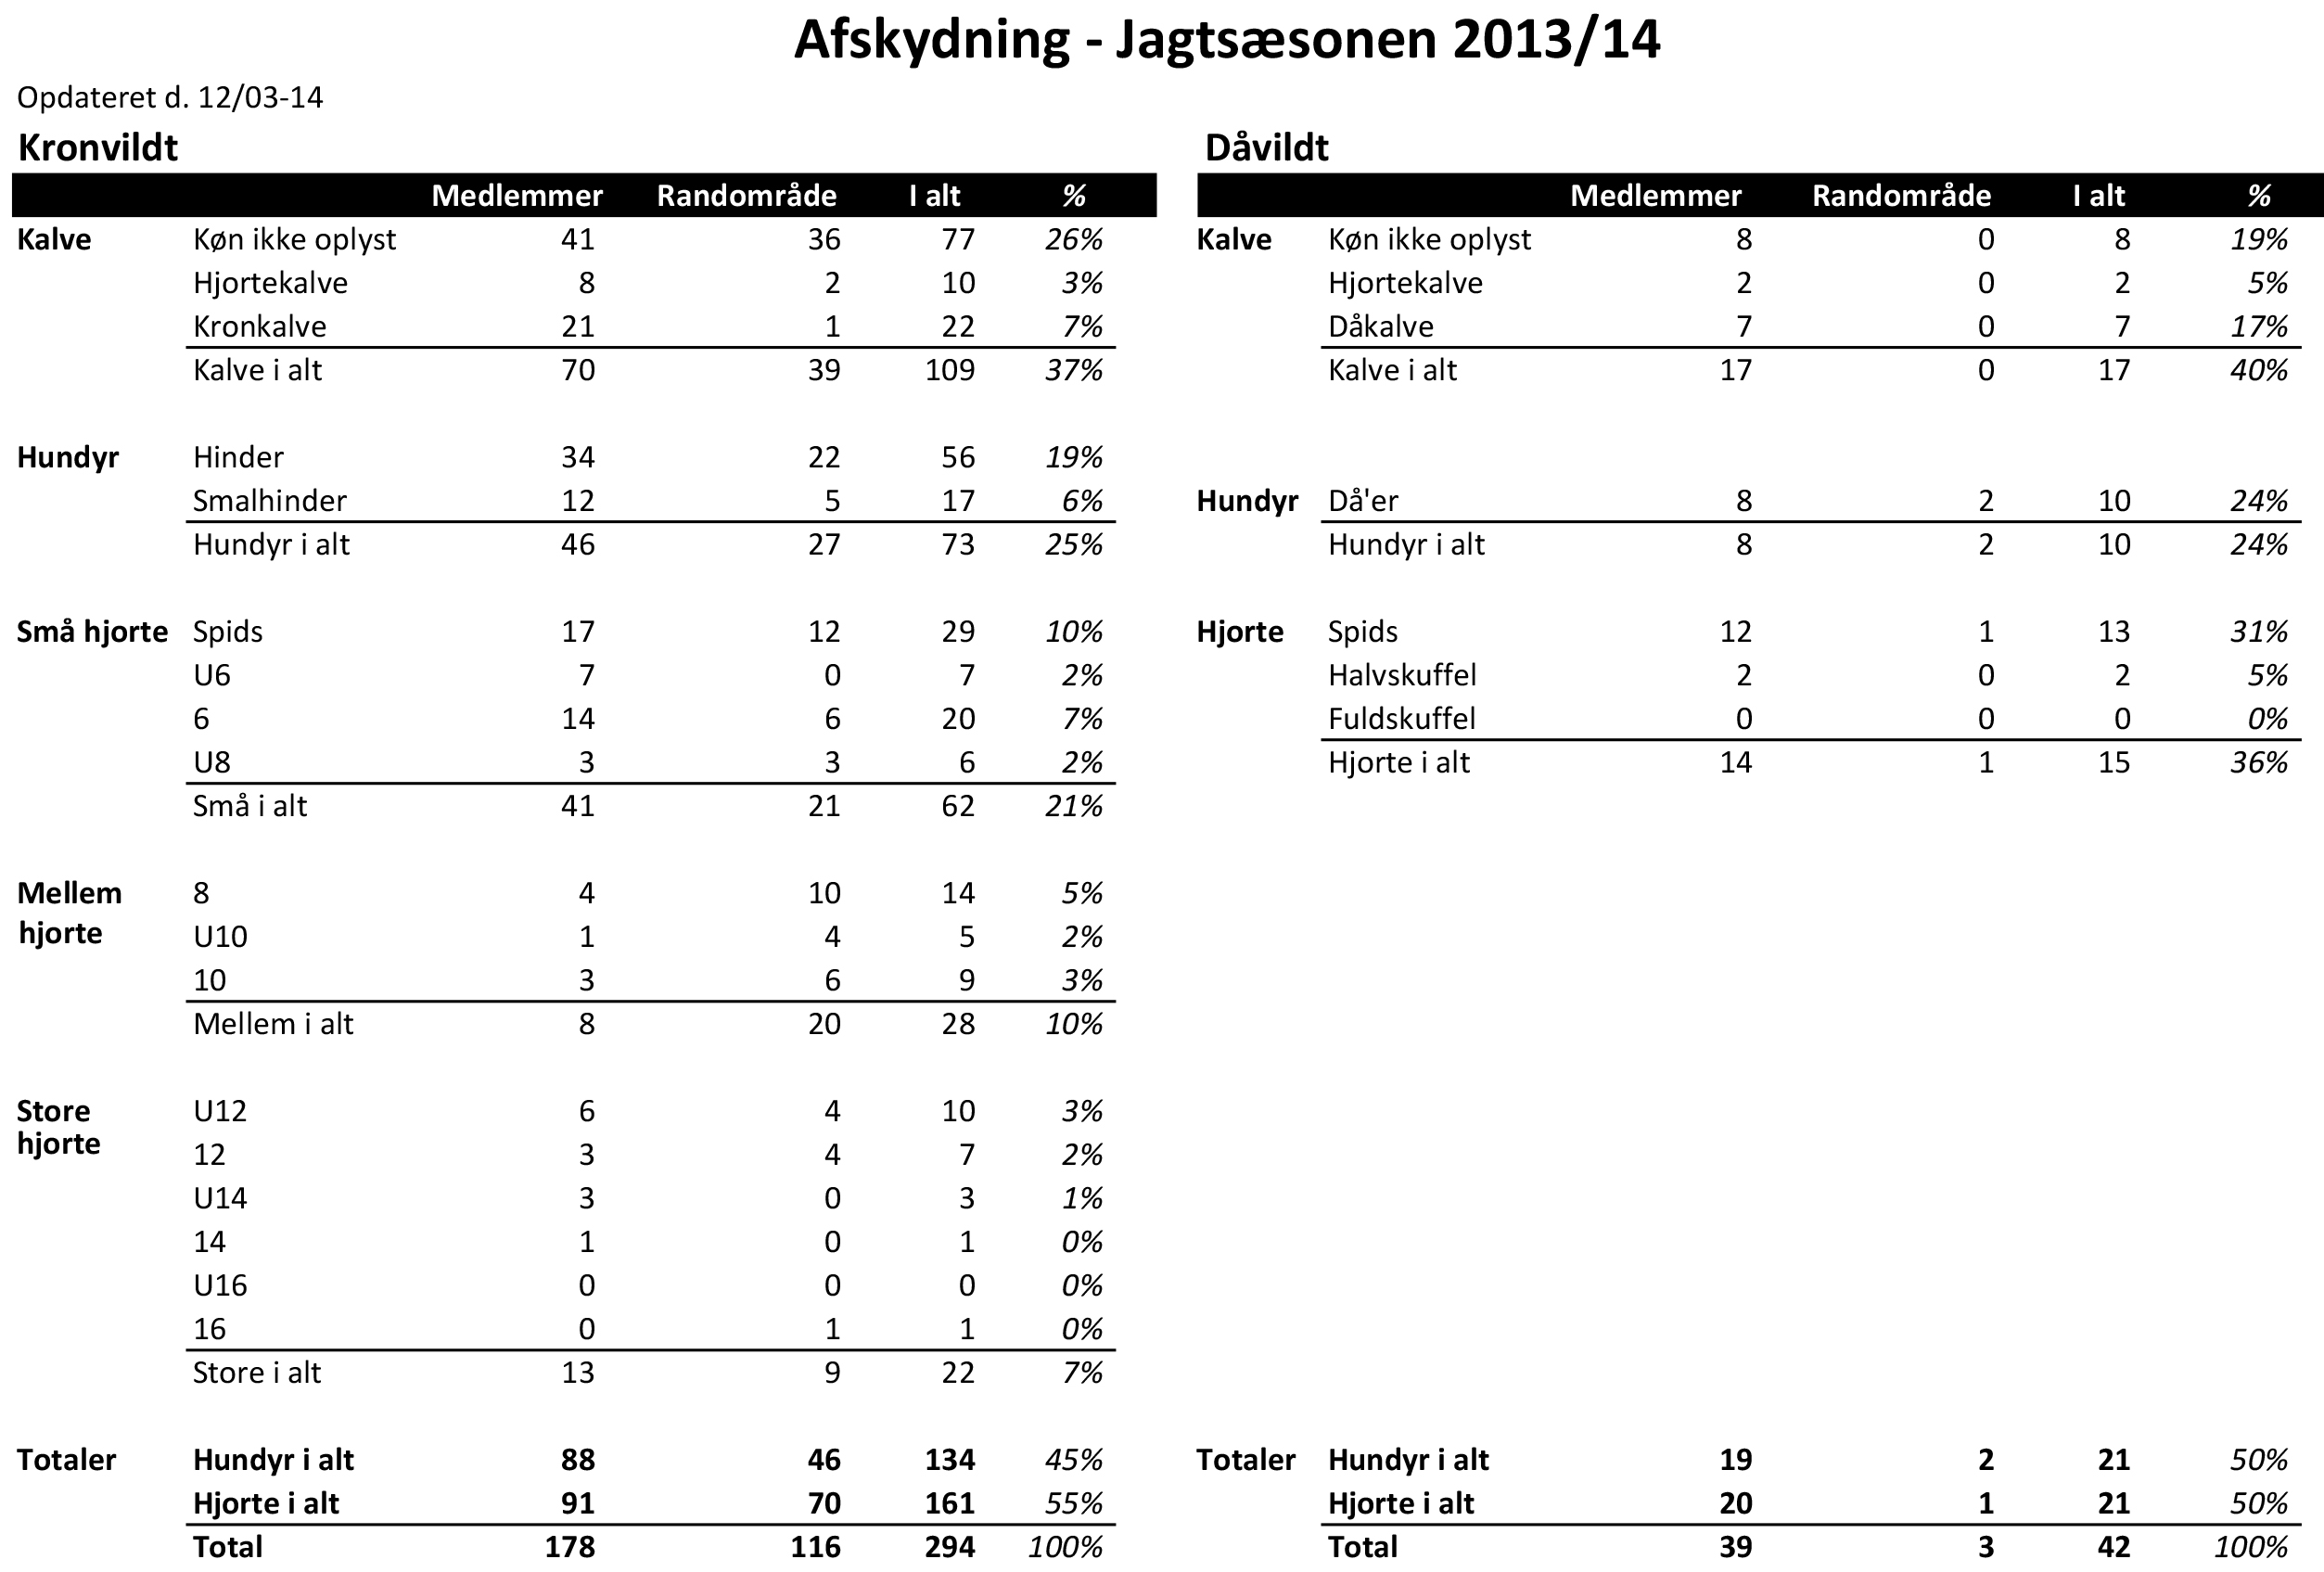 Udbytte 2013-14 - total 120314